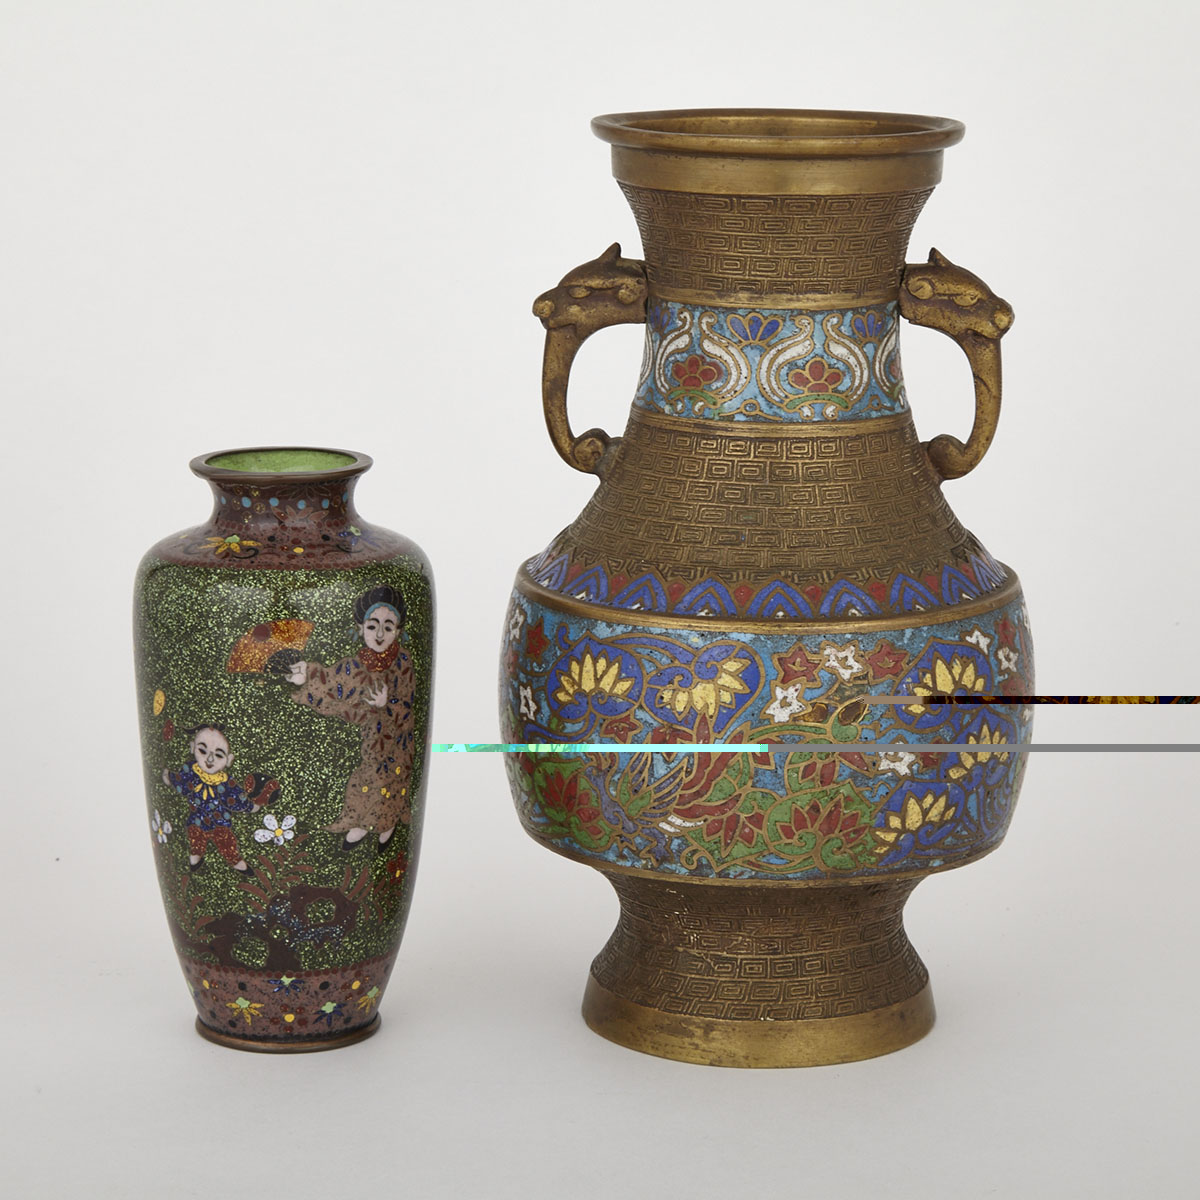 Two Japanese Cloisonne Vessels